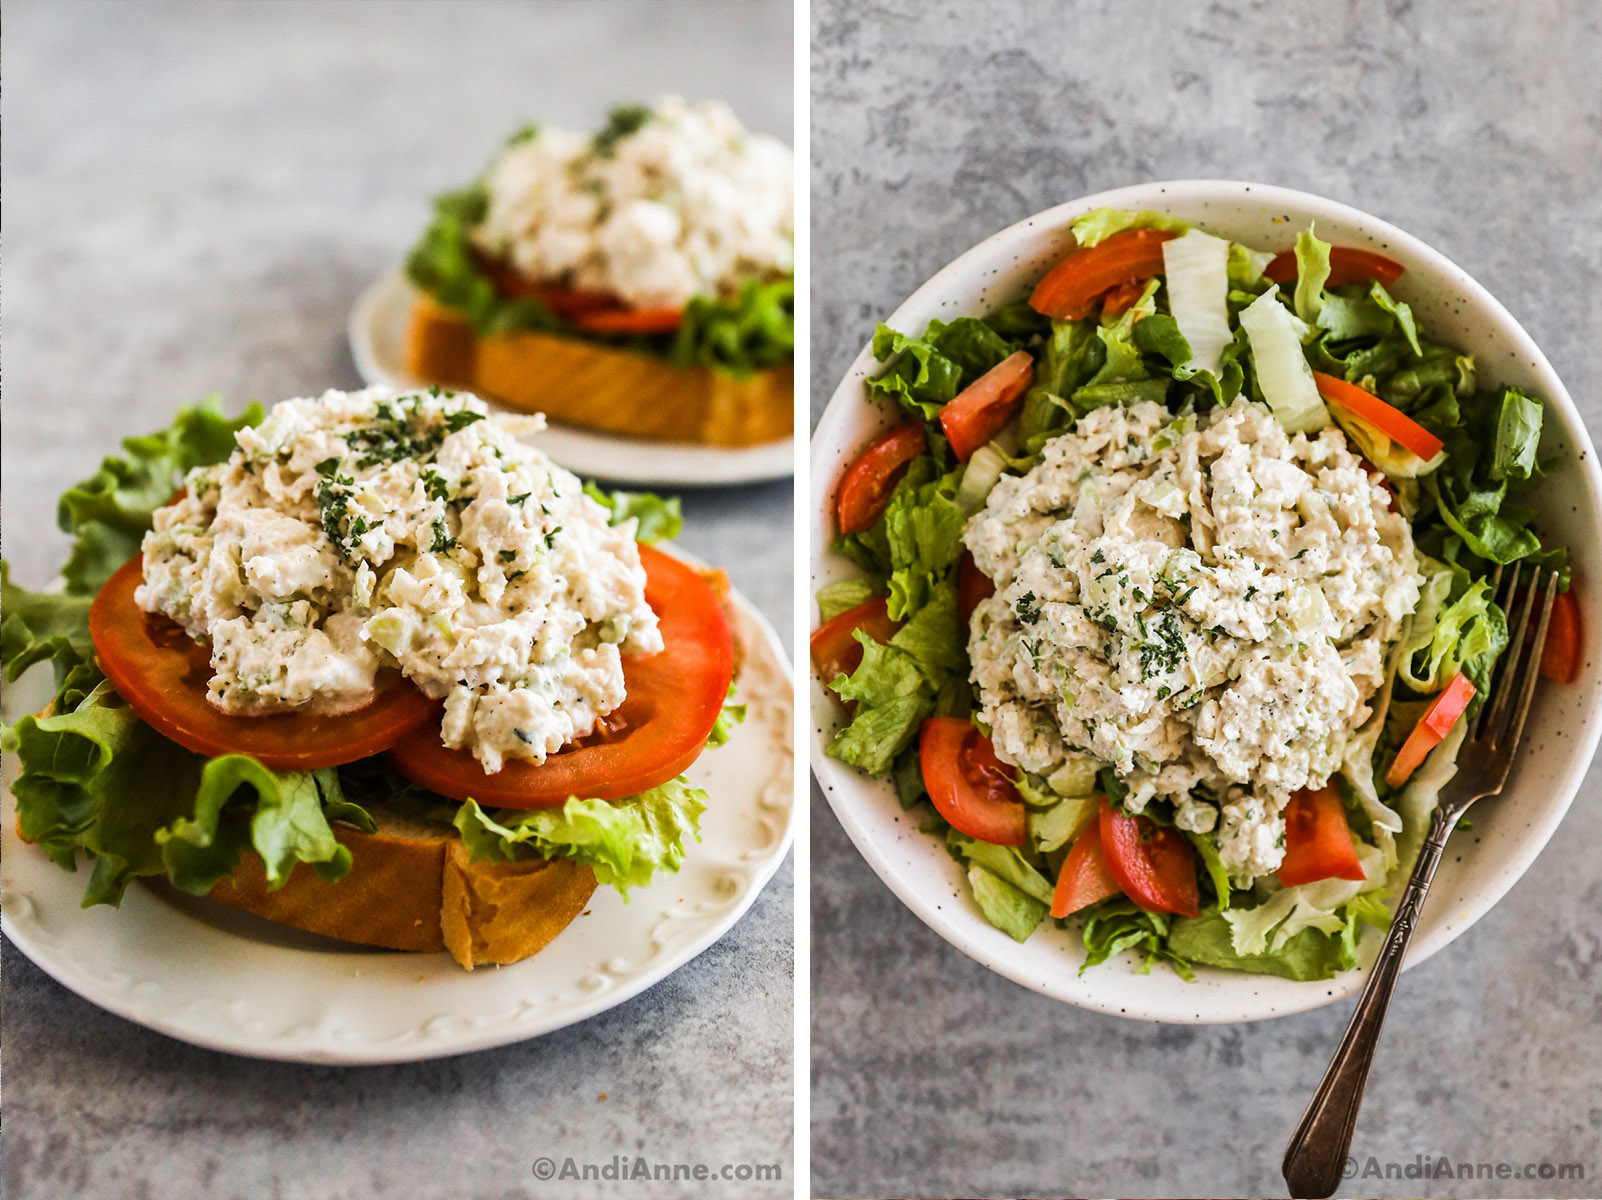 Chicken salad on a sandwich and in a bowl of vegetables.